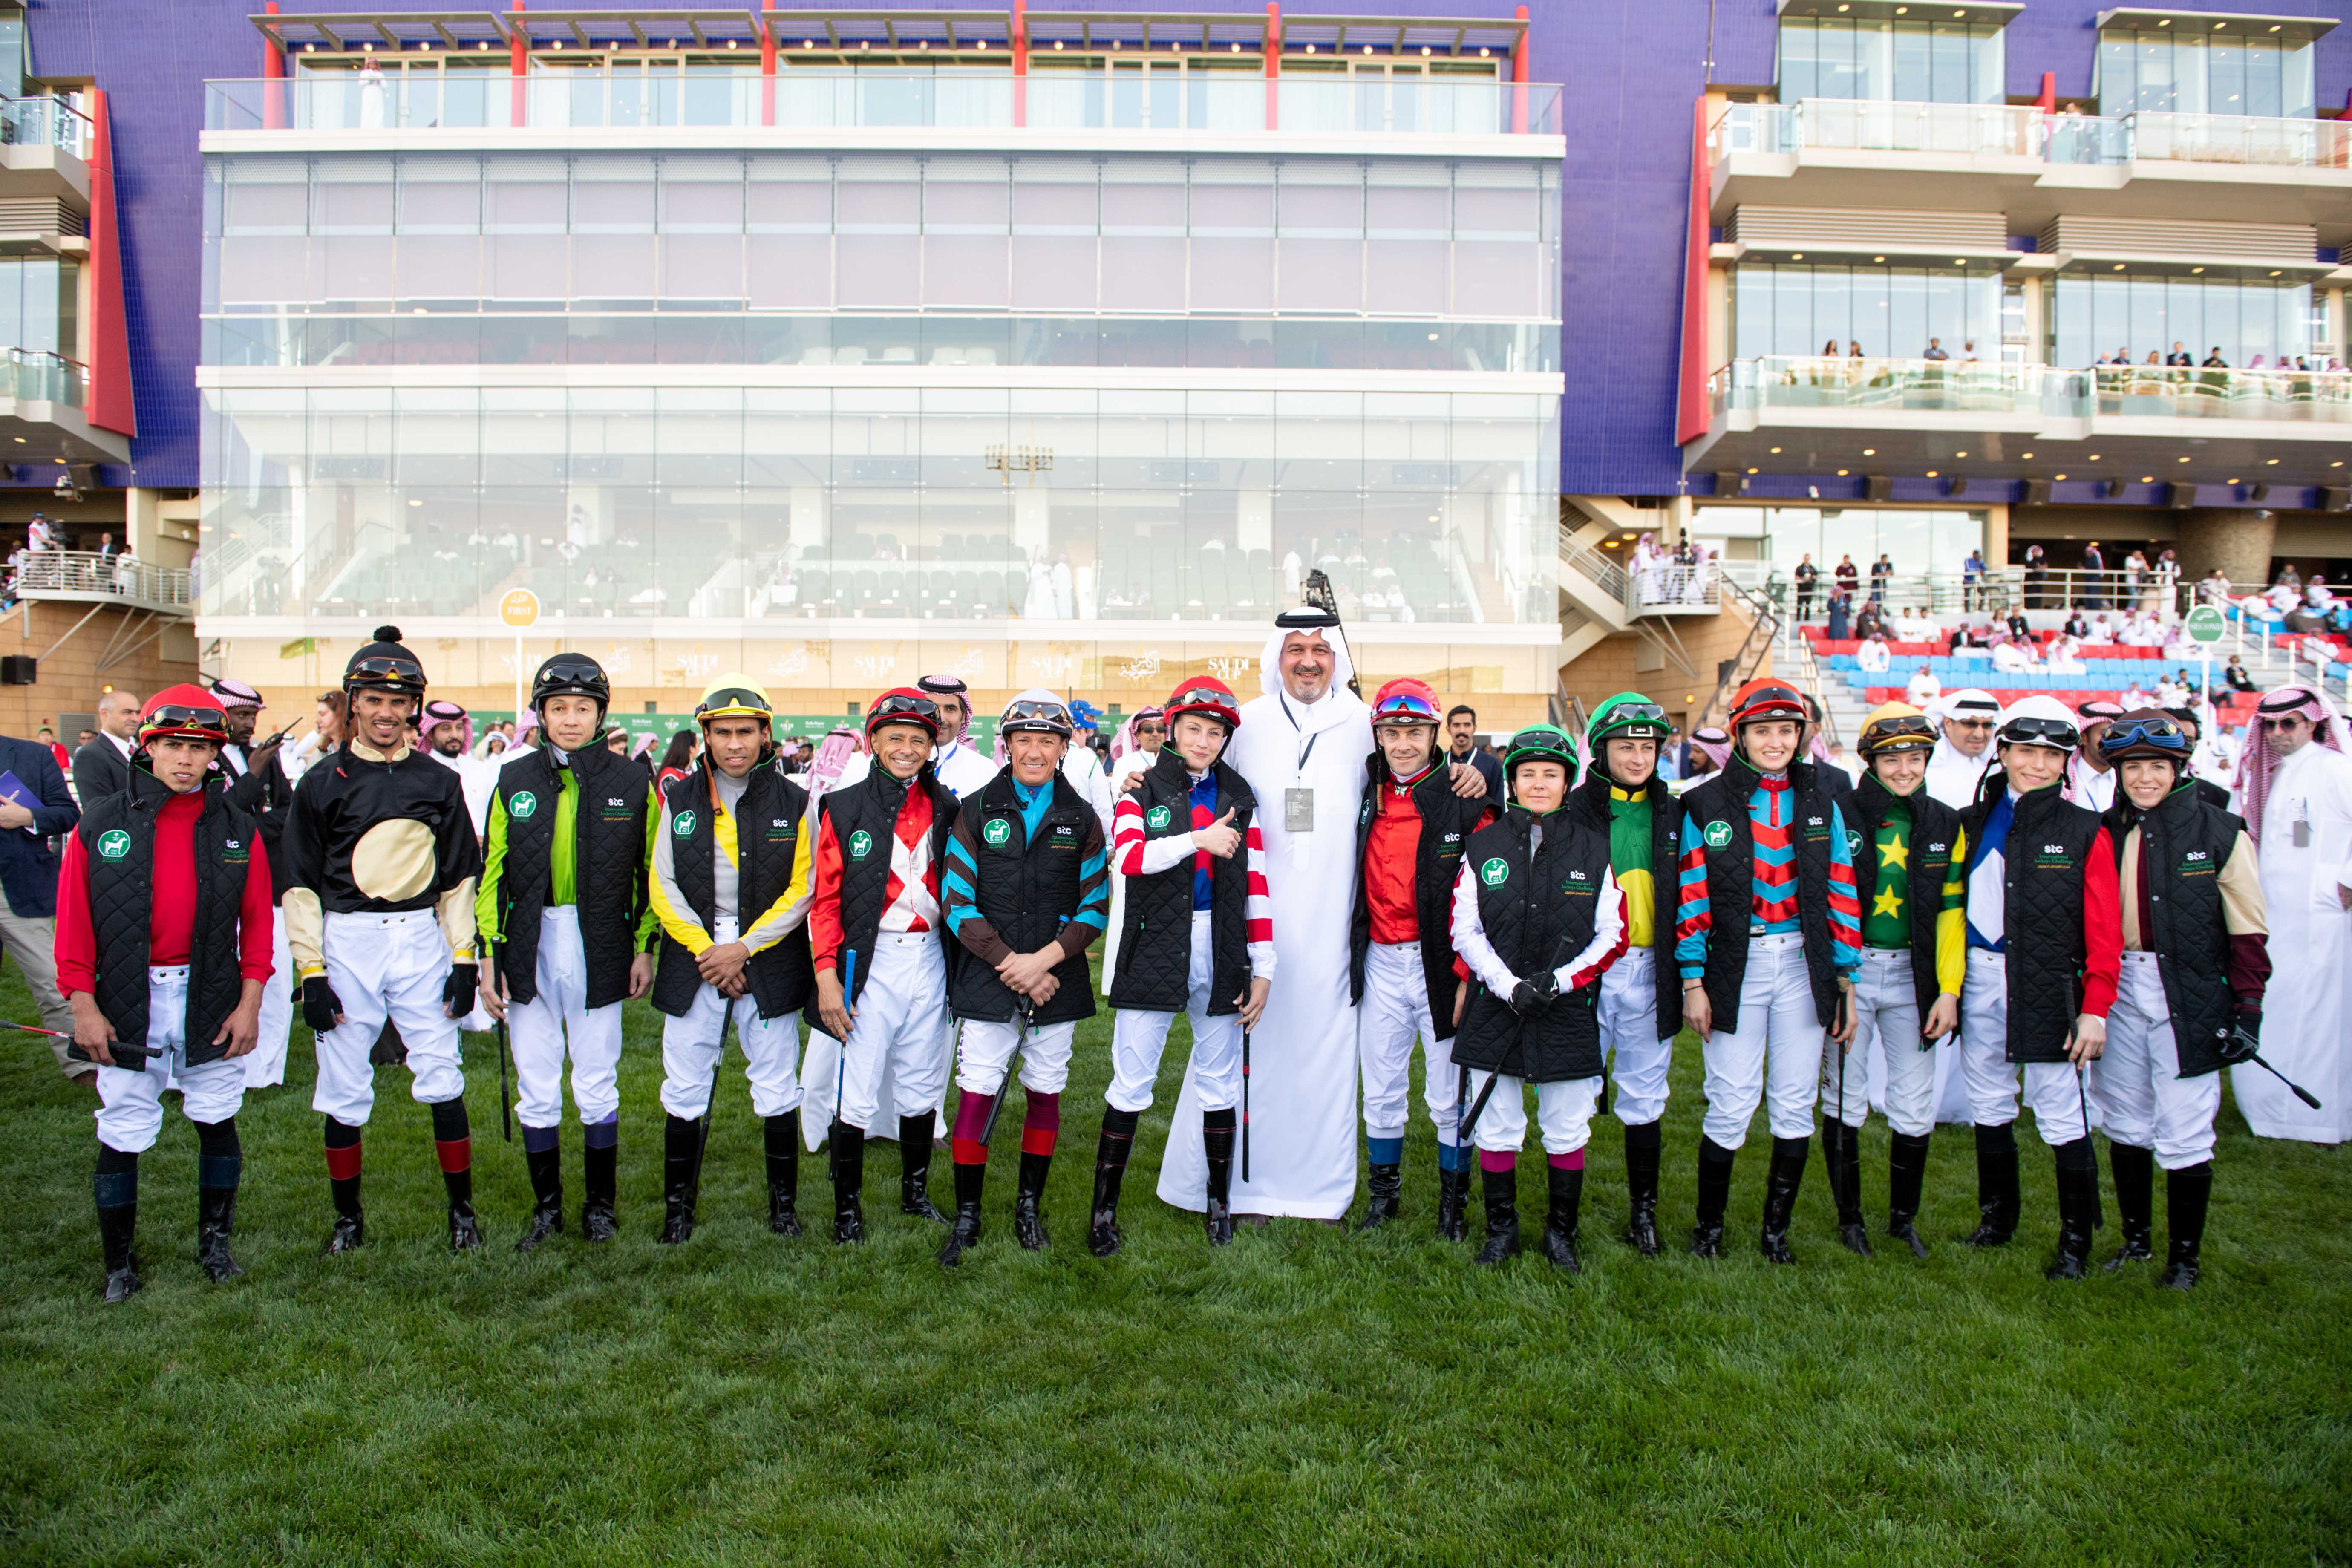 All-star line-up: Prince Bandar with the seven men and seven women riders who took part in the jockey challenge. Photo: Jockey Club of Saudi Arabia/Doug DeFelice